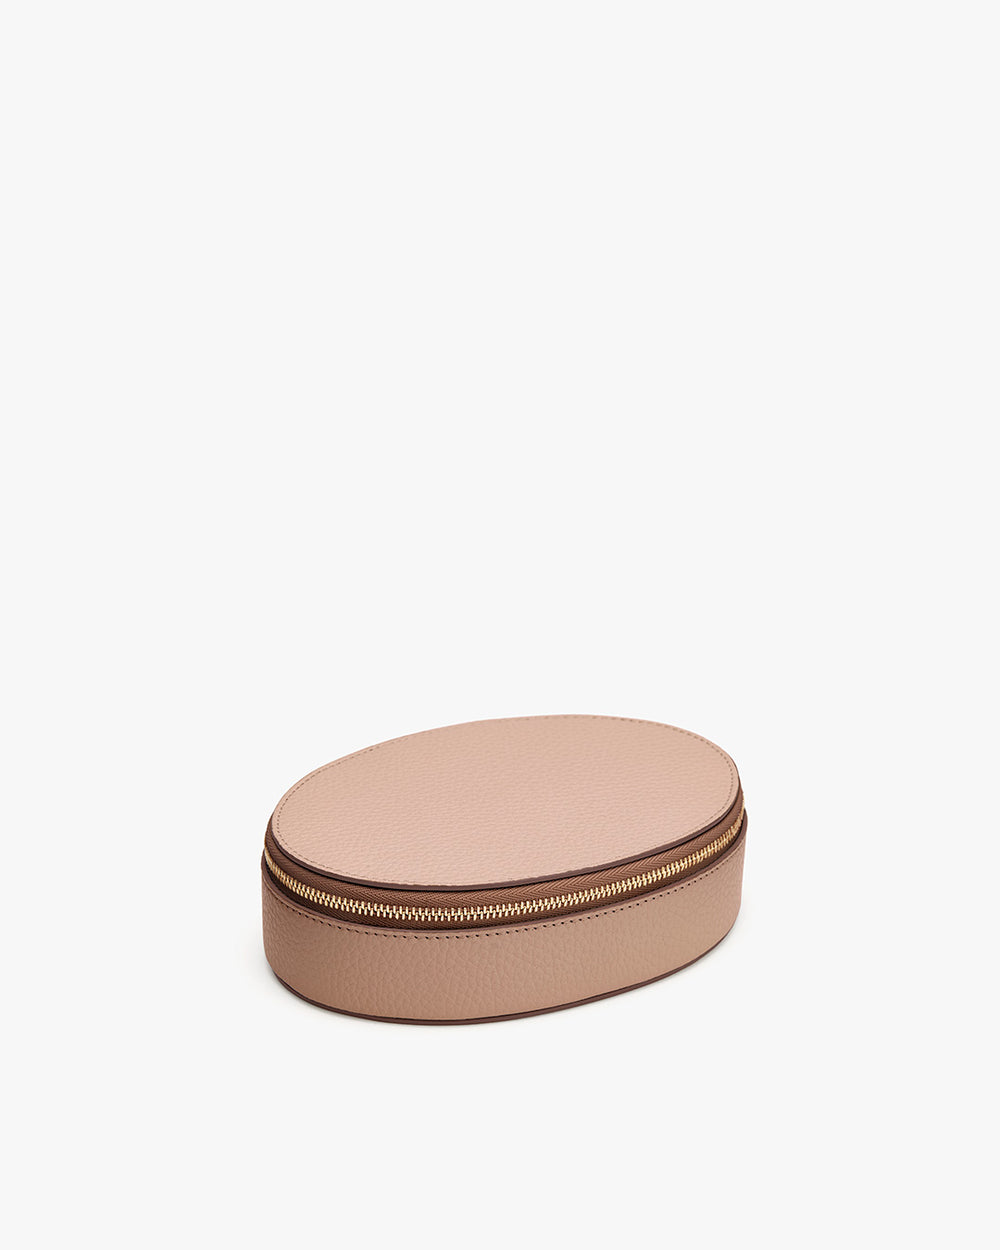 Oval-shaped case with a zipper on a plain background.